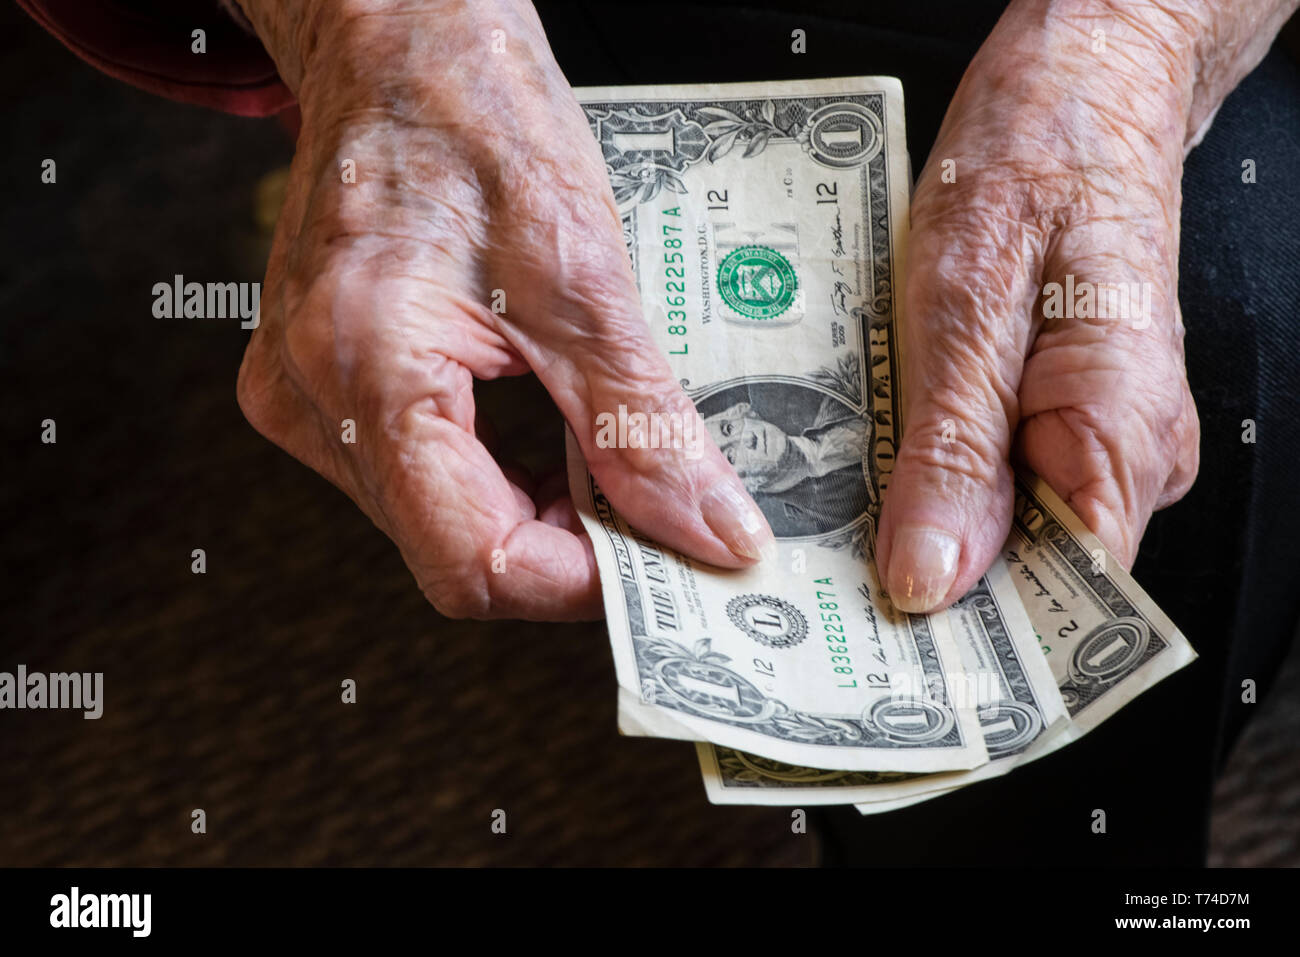 Senior woman's hands counting out a few dollars; Olympia, Washington, United States of America Stock Photo